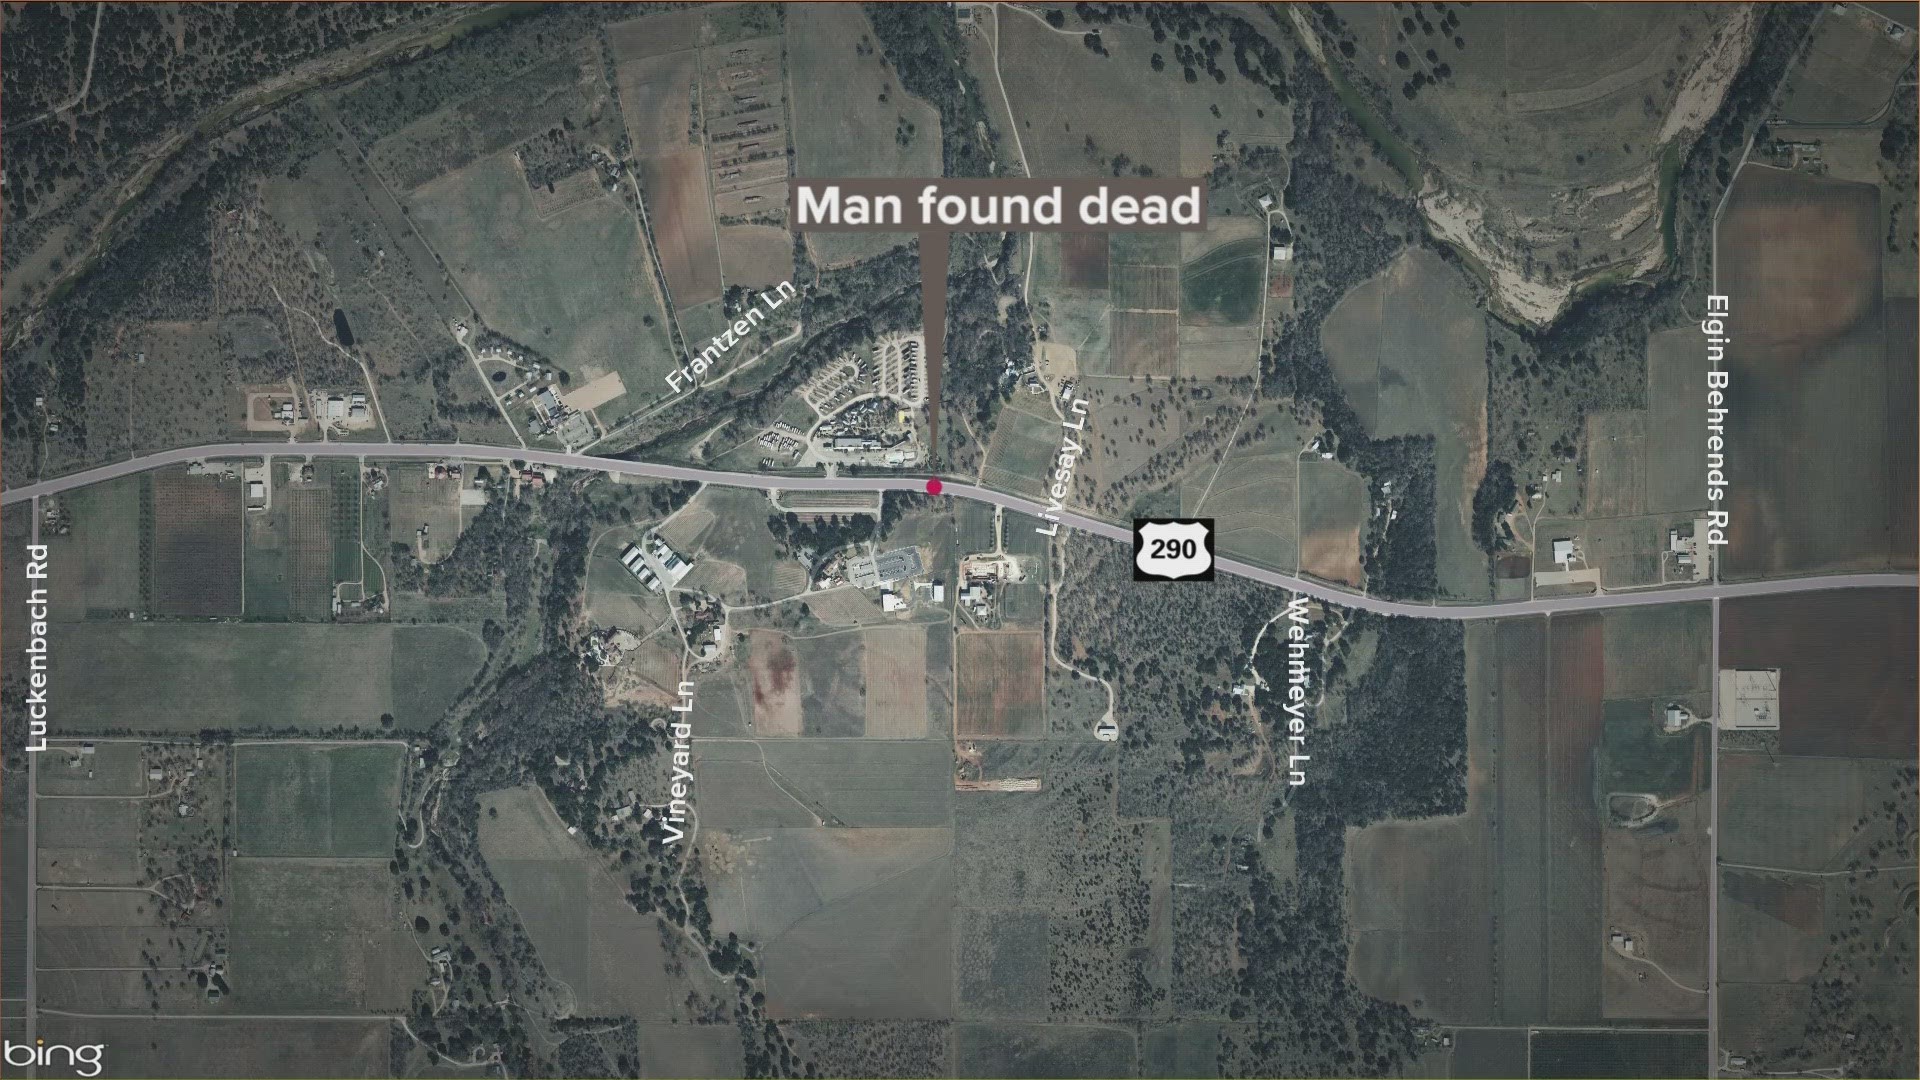 The woman stated she was kidnapped Friday off U.S. 290 near Fredericksburg, Texas.